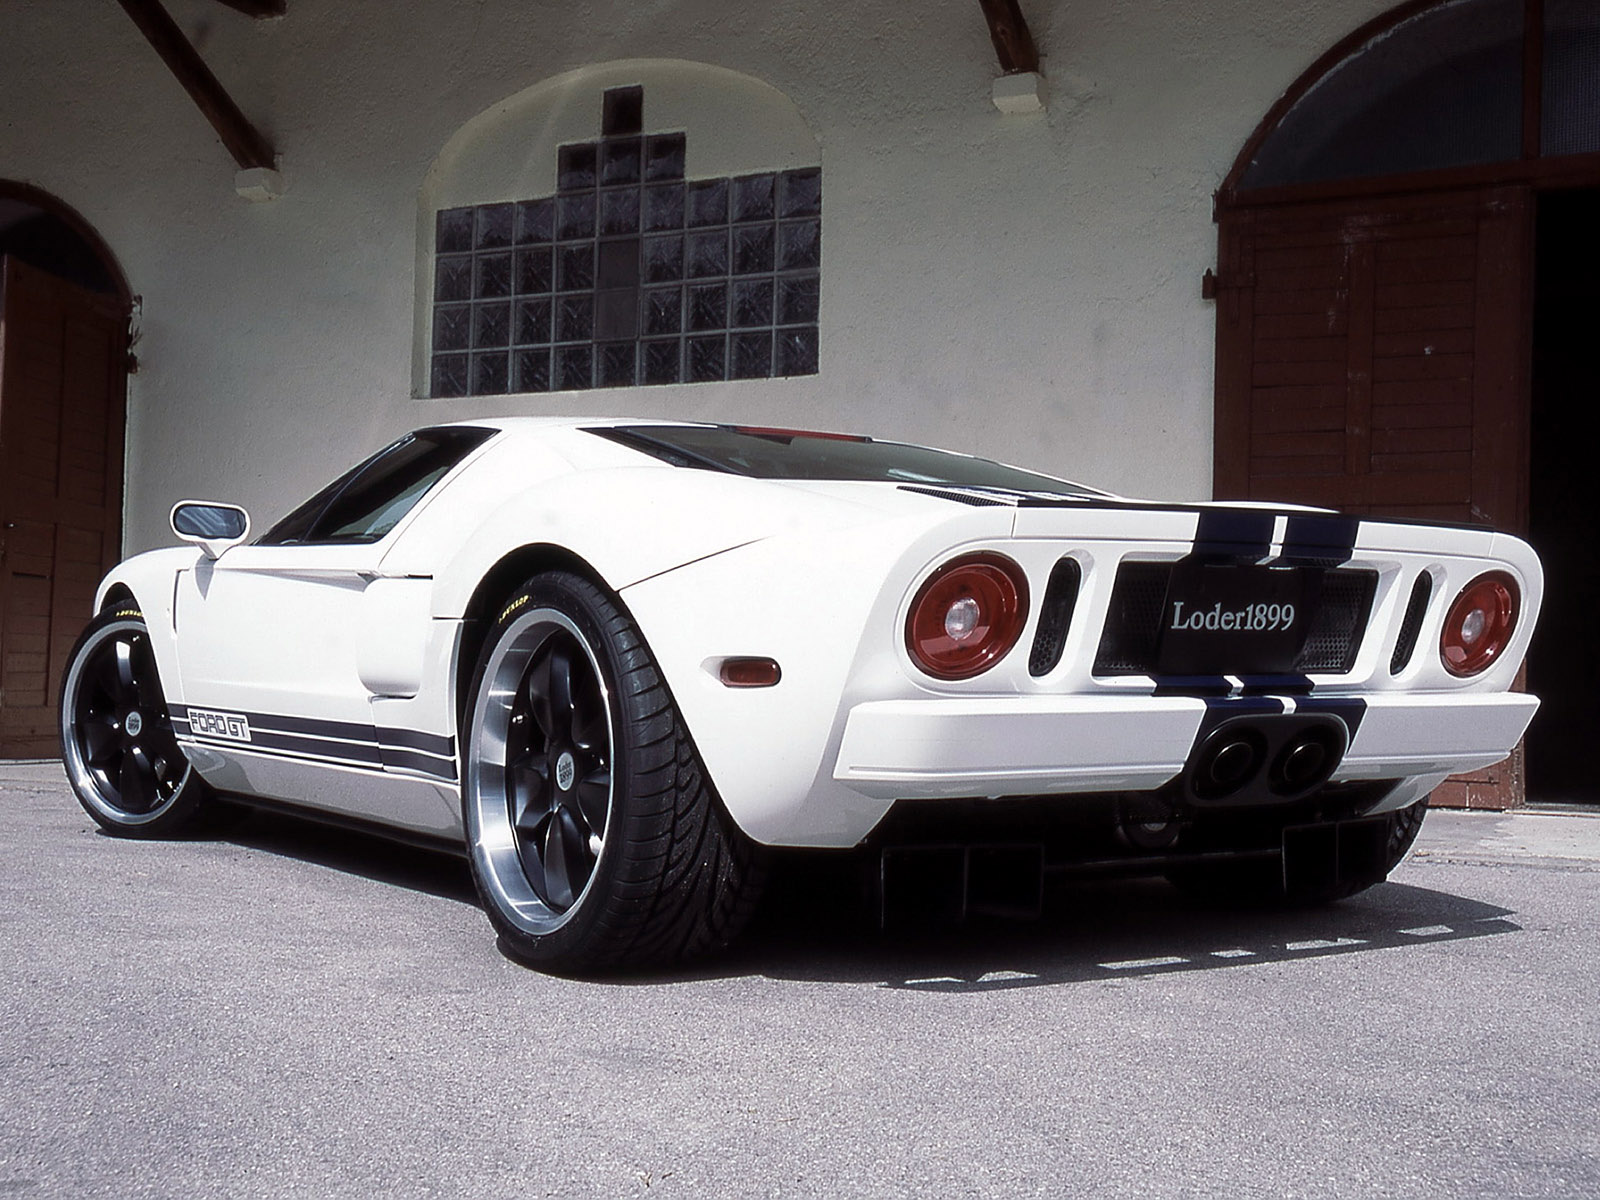 2006_Ford_GT_by_Loder1899_002_0884